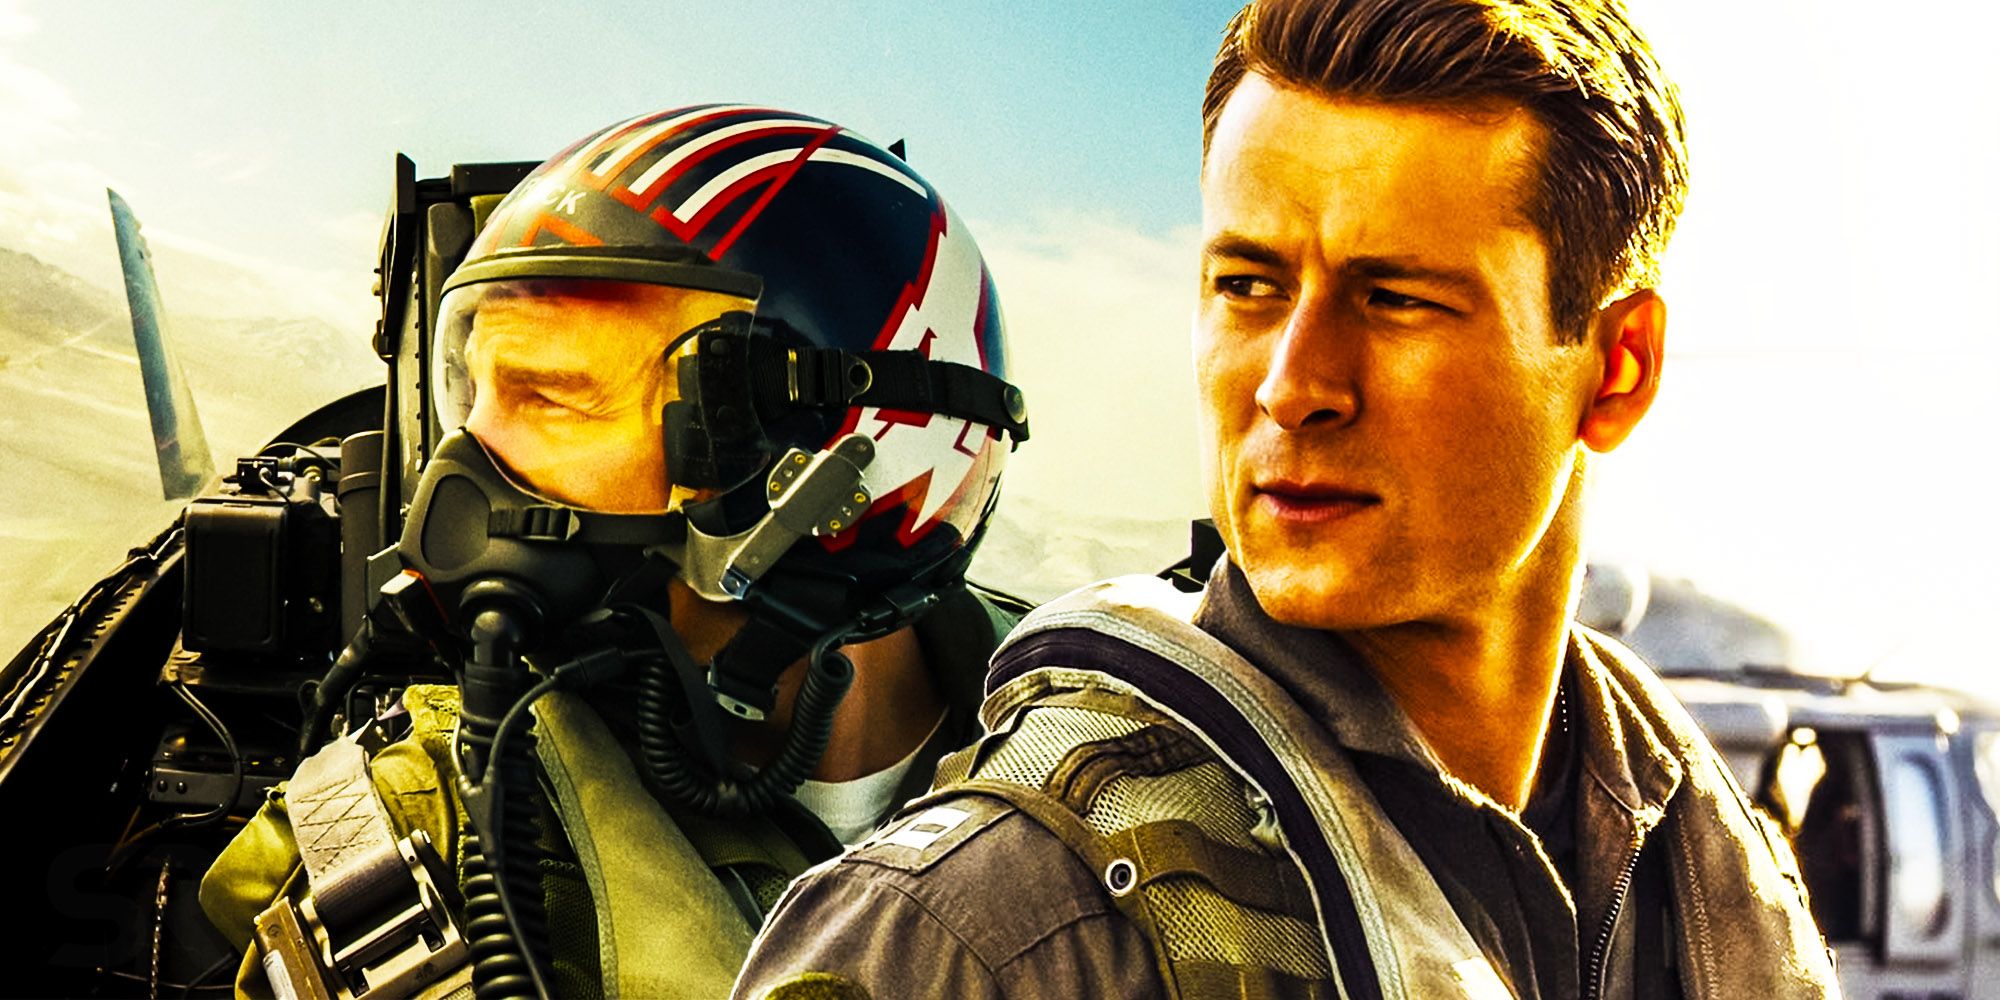 The Perfect Release Date For Top Gun 3 (But Will It Happen?)